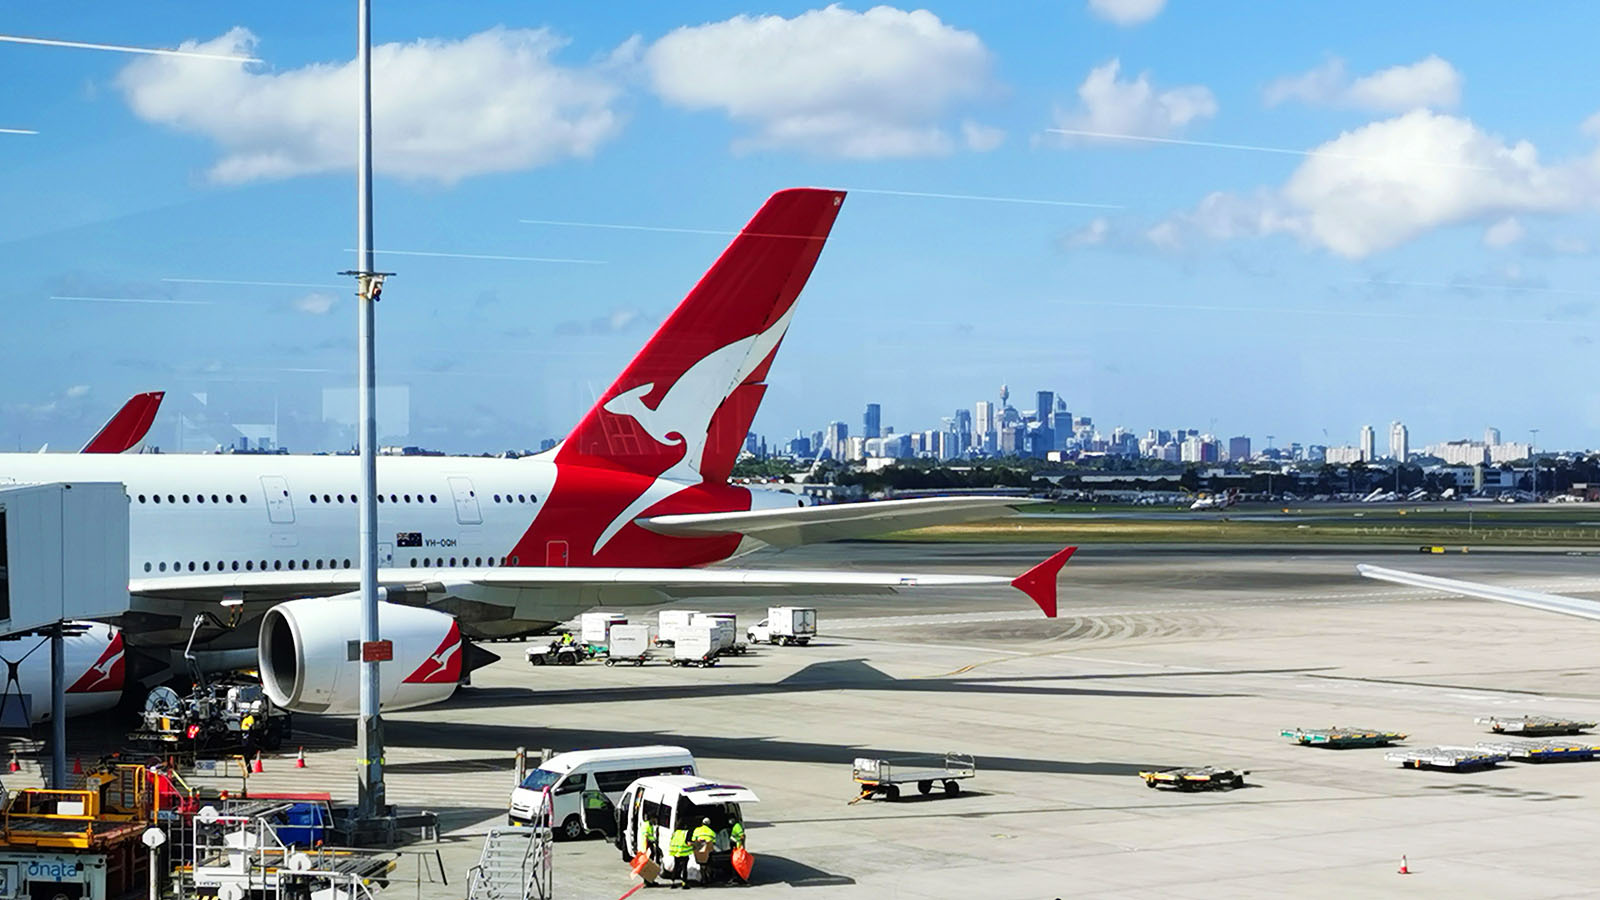 Sydney Airport - 12 new luxury retail stores are coming to